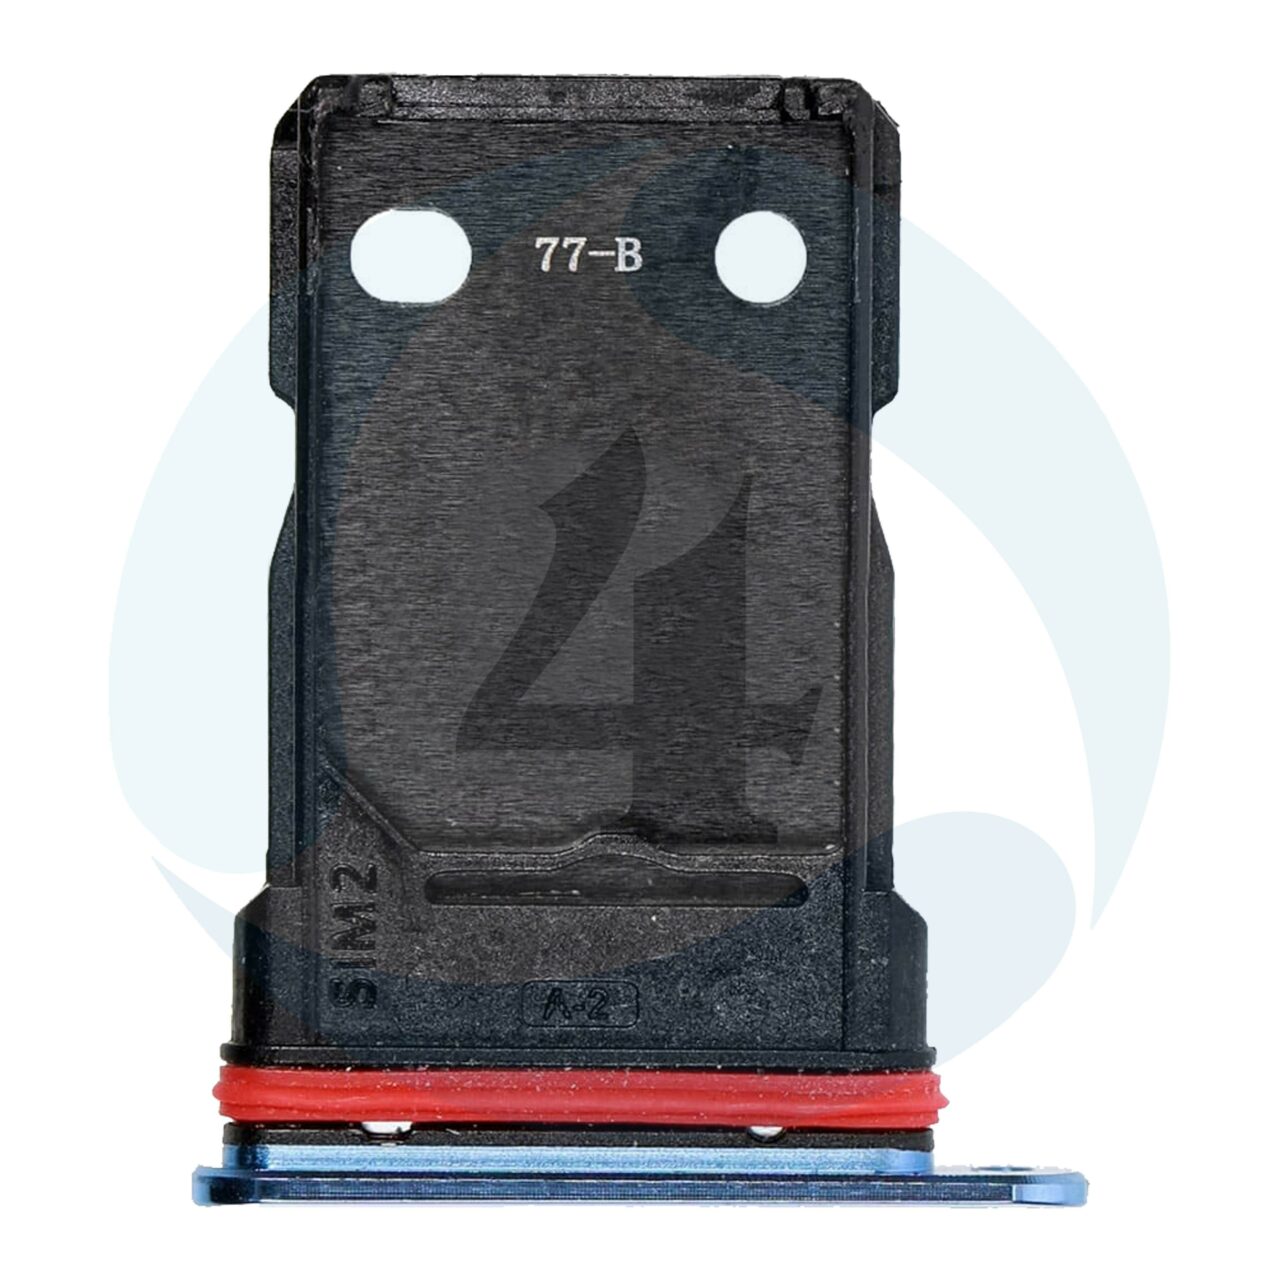 Replacement for oneplus 7t dual sim card tray glacier blue 1